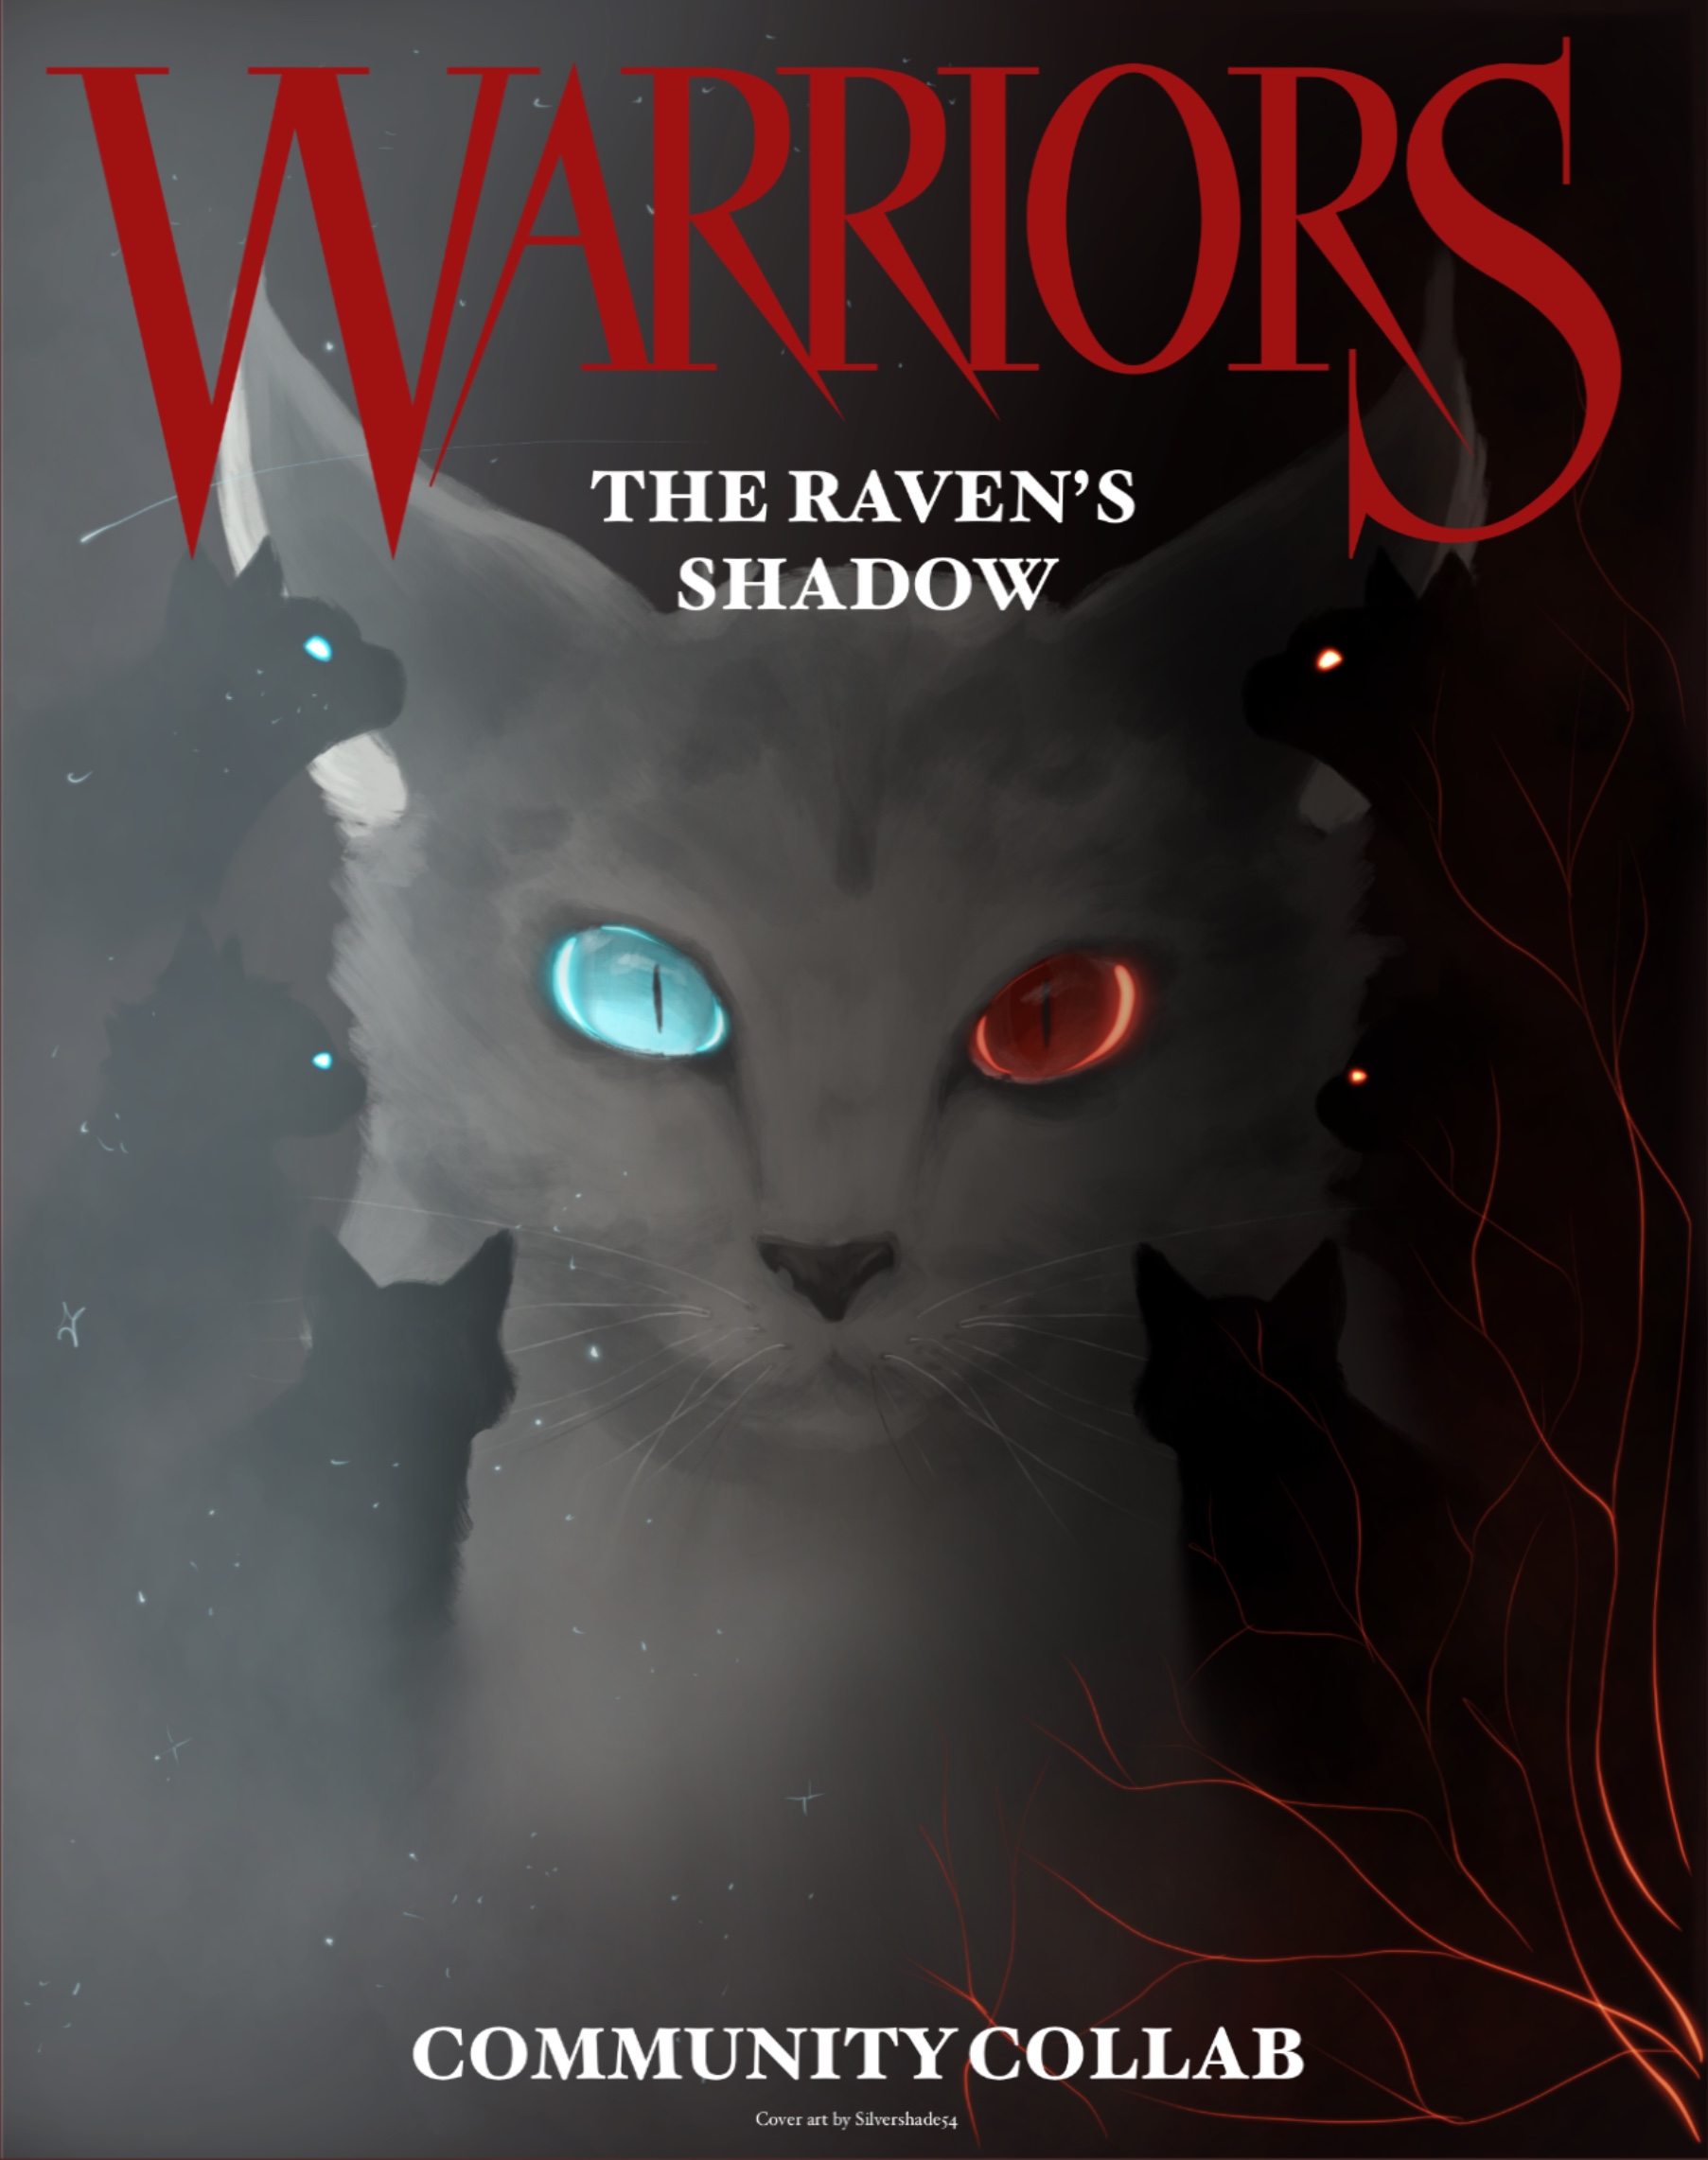 Woah well SOMEBODY'S got patience.  Warrior cats comics, Warrior cats  art, Warrior cats funny